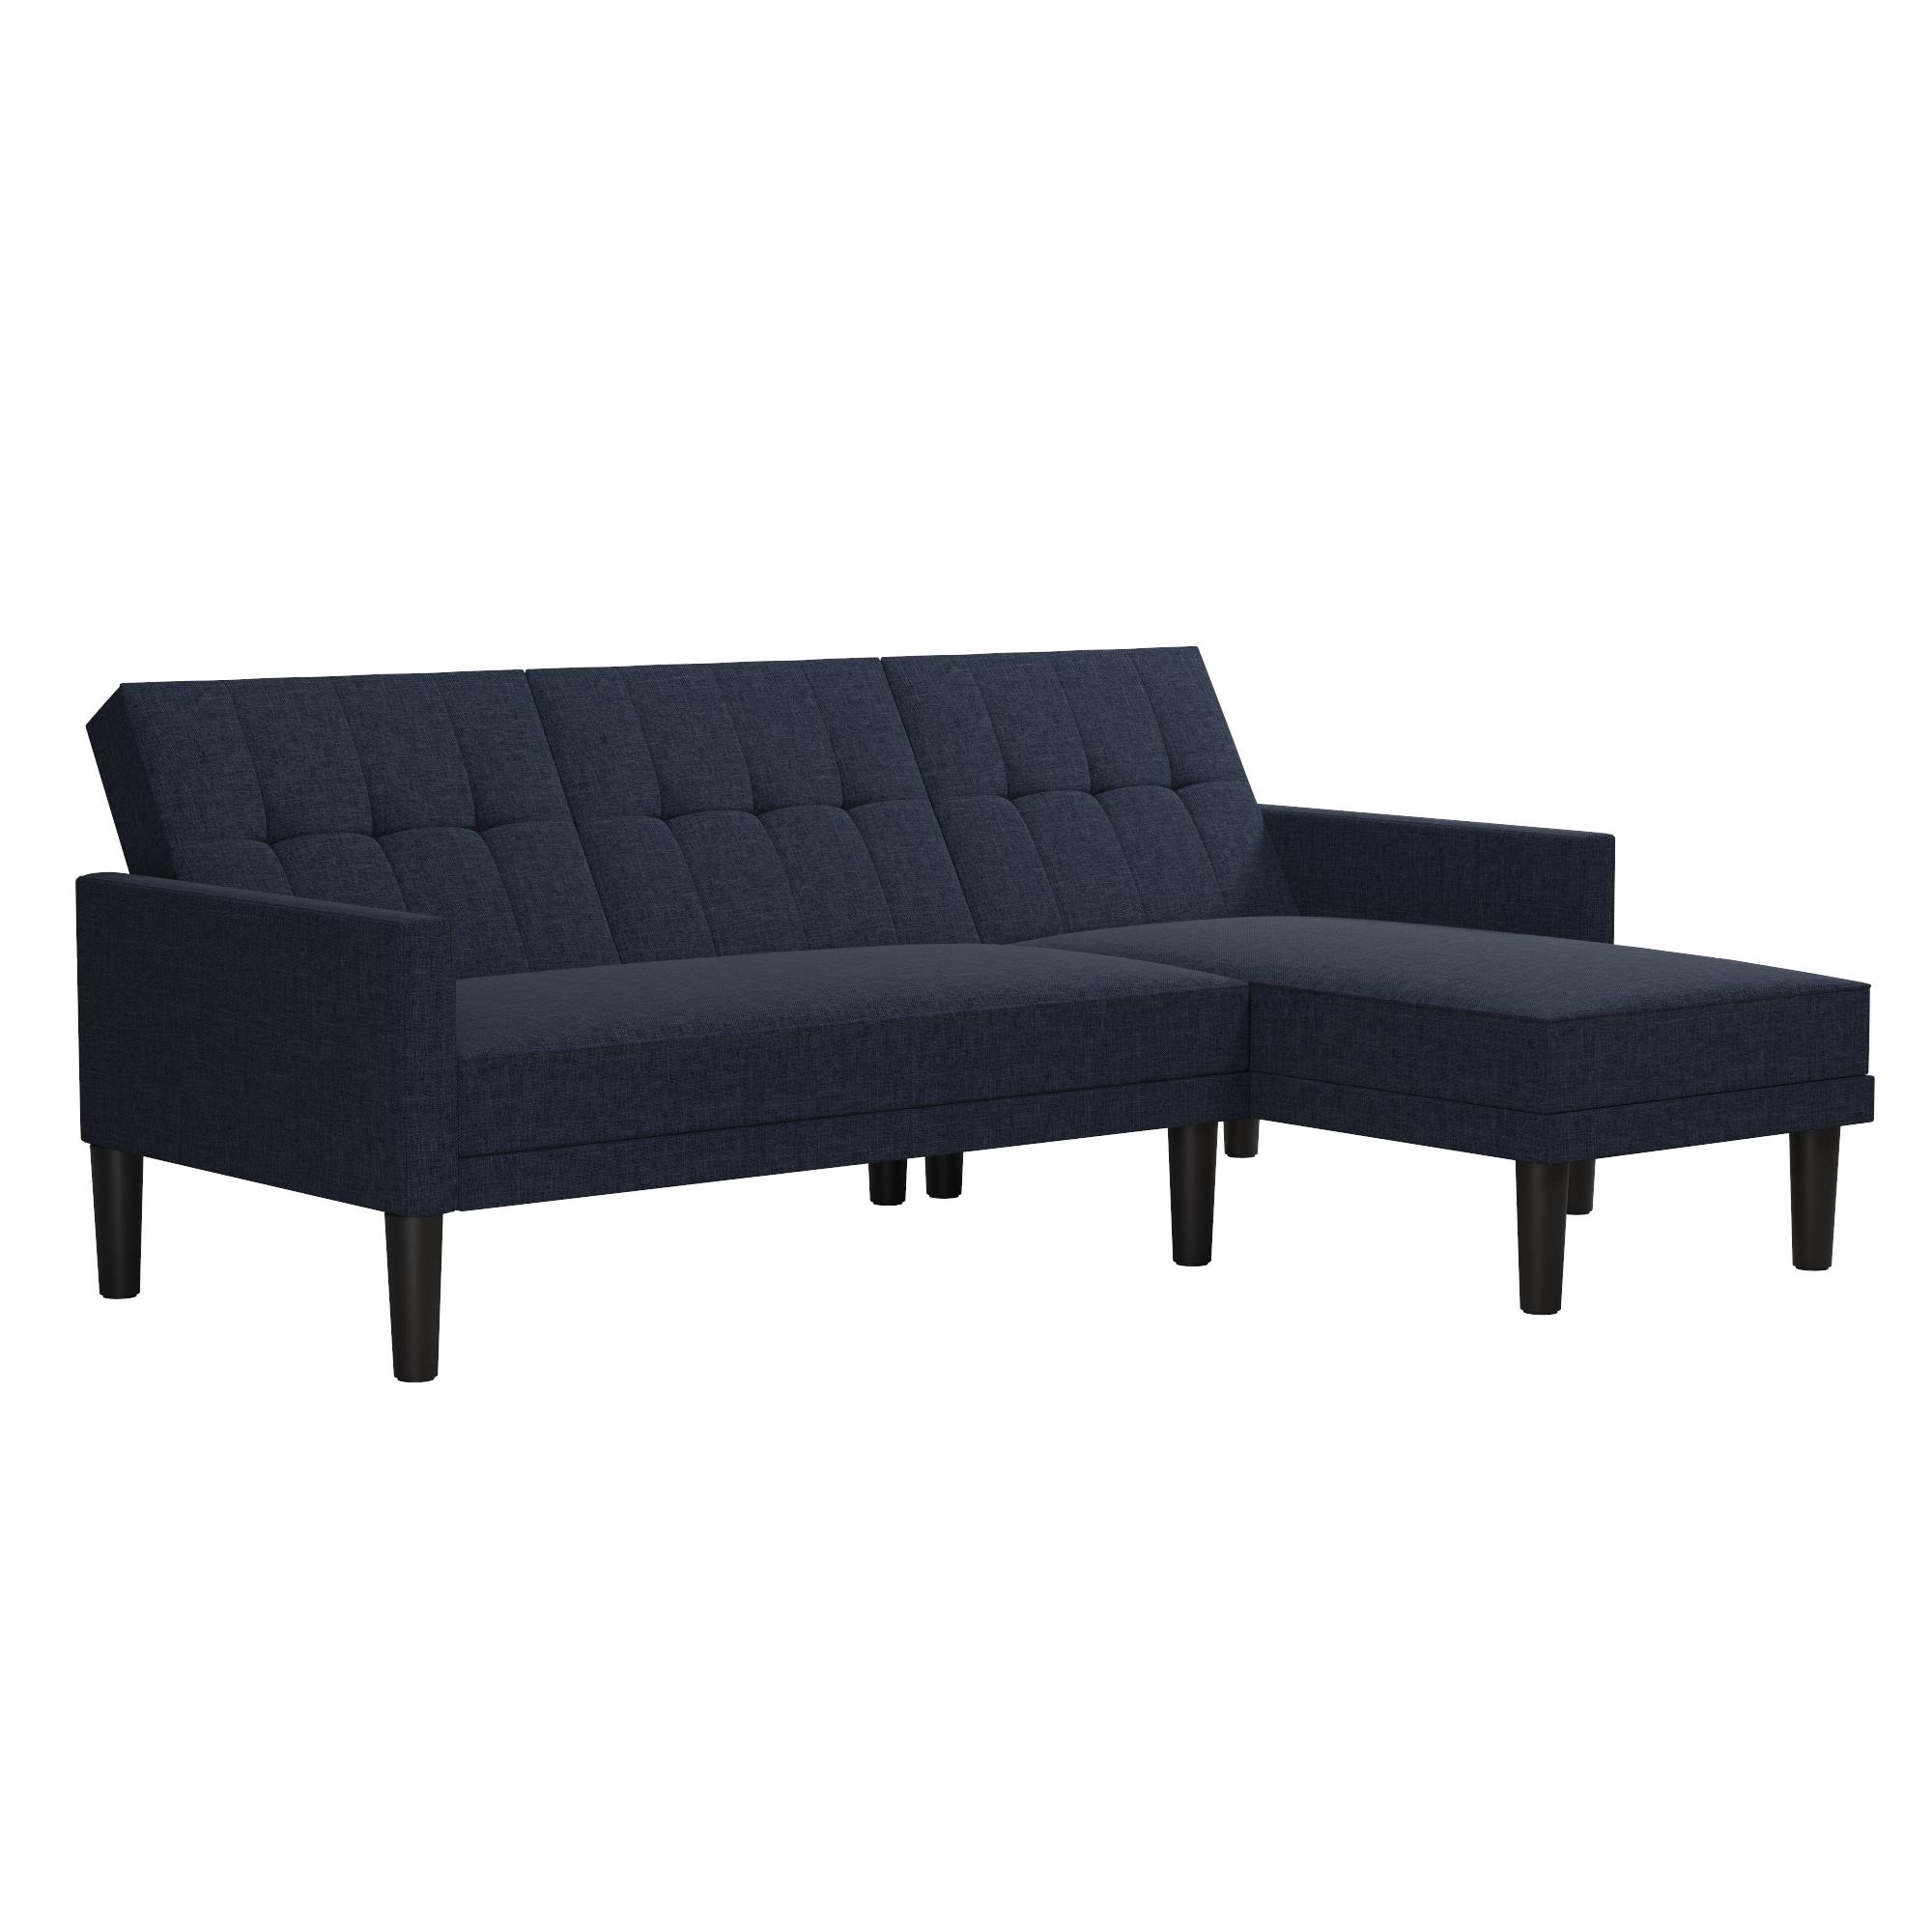 DHP Hudson Small Space Sectional Sofa Futon, Blue Linen - image 4 of 19